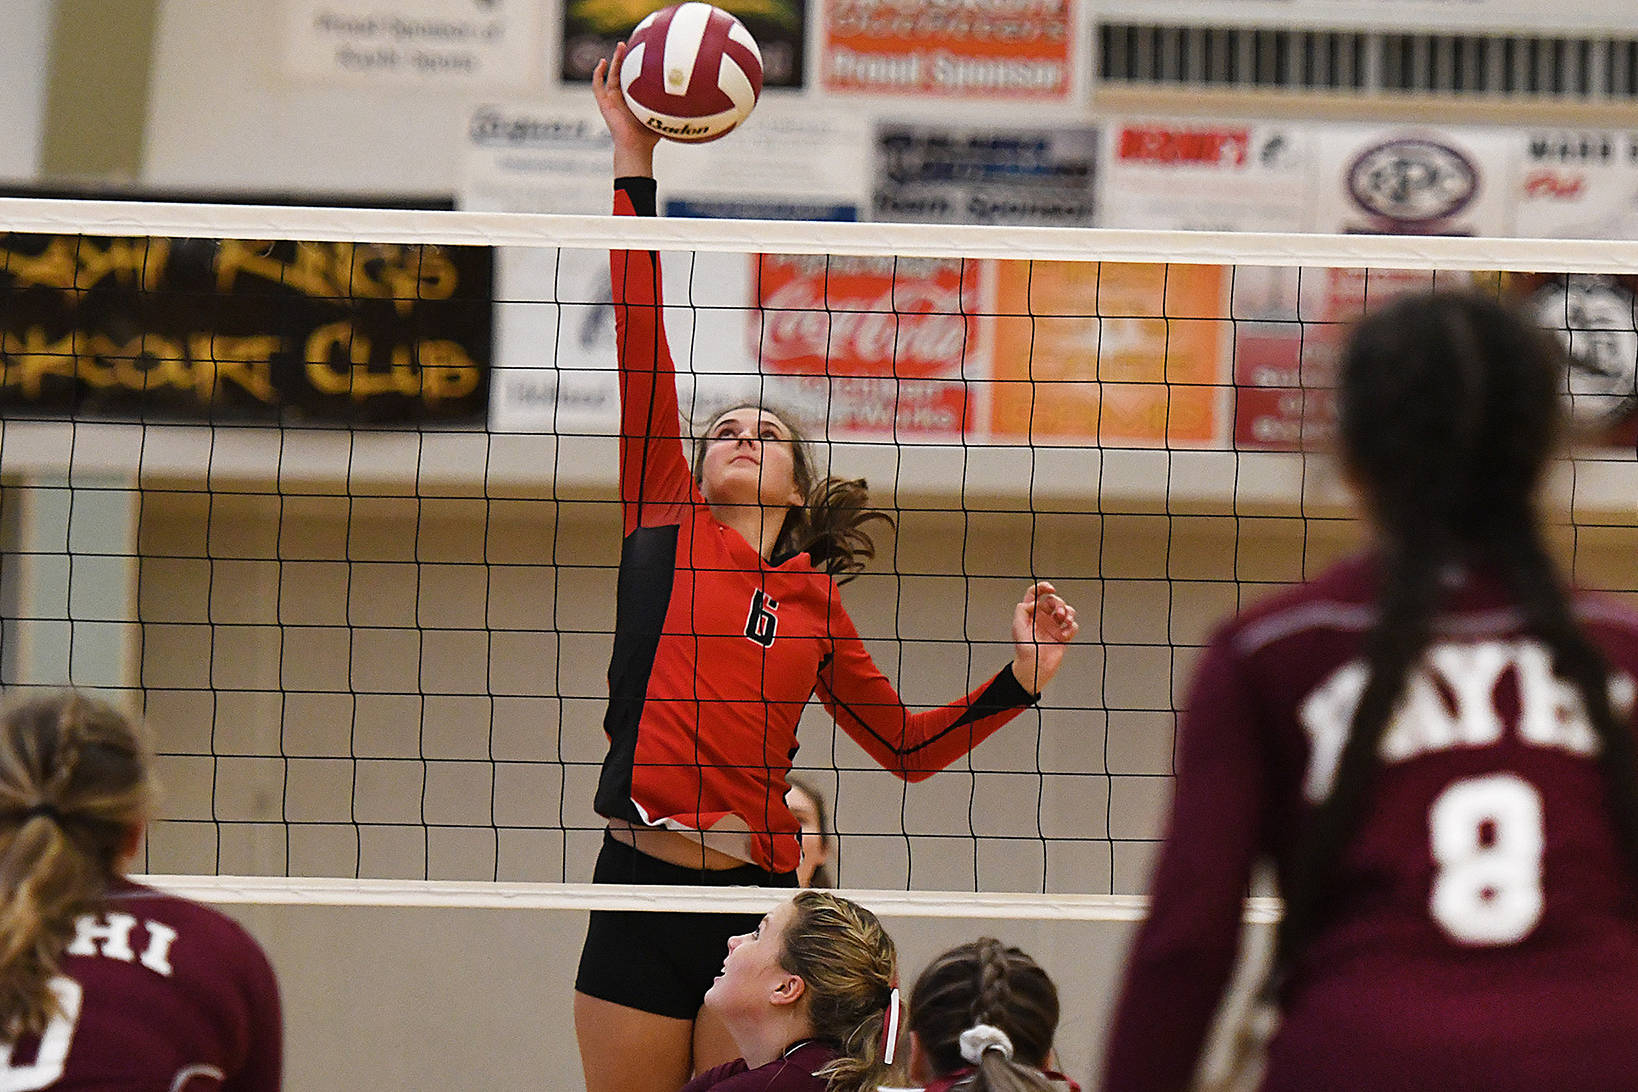 Juneau Douglas middle blocker Addie Prussing taps the ball over the net during a 3-0 victory over the Ketchikan Kings on Saturday. (Dustin Safranek | Ketchikan Daily News)